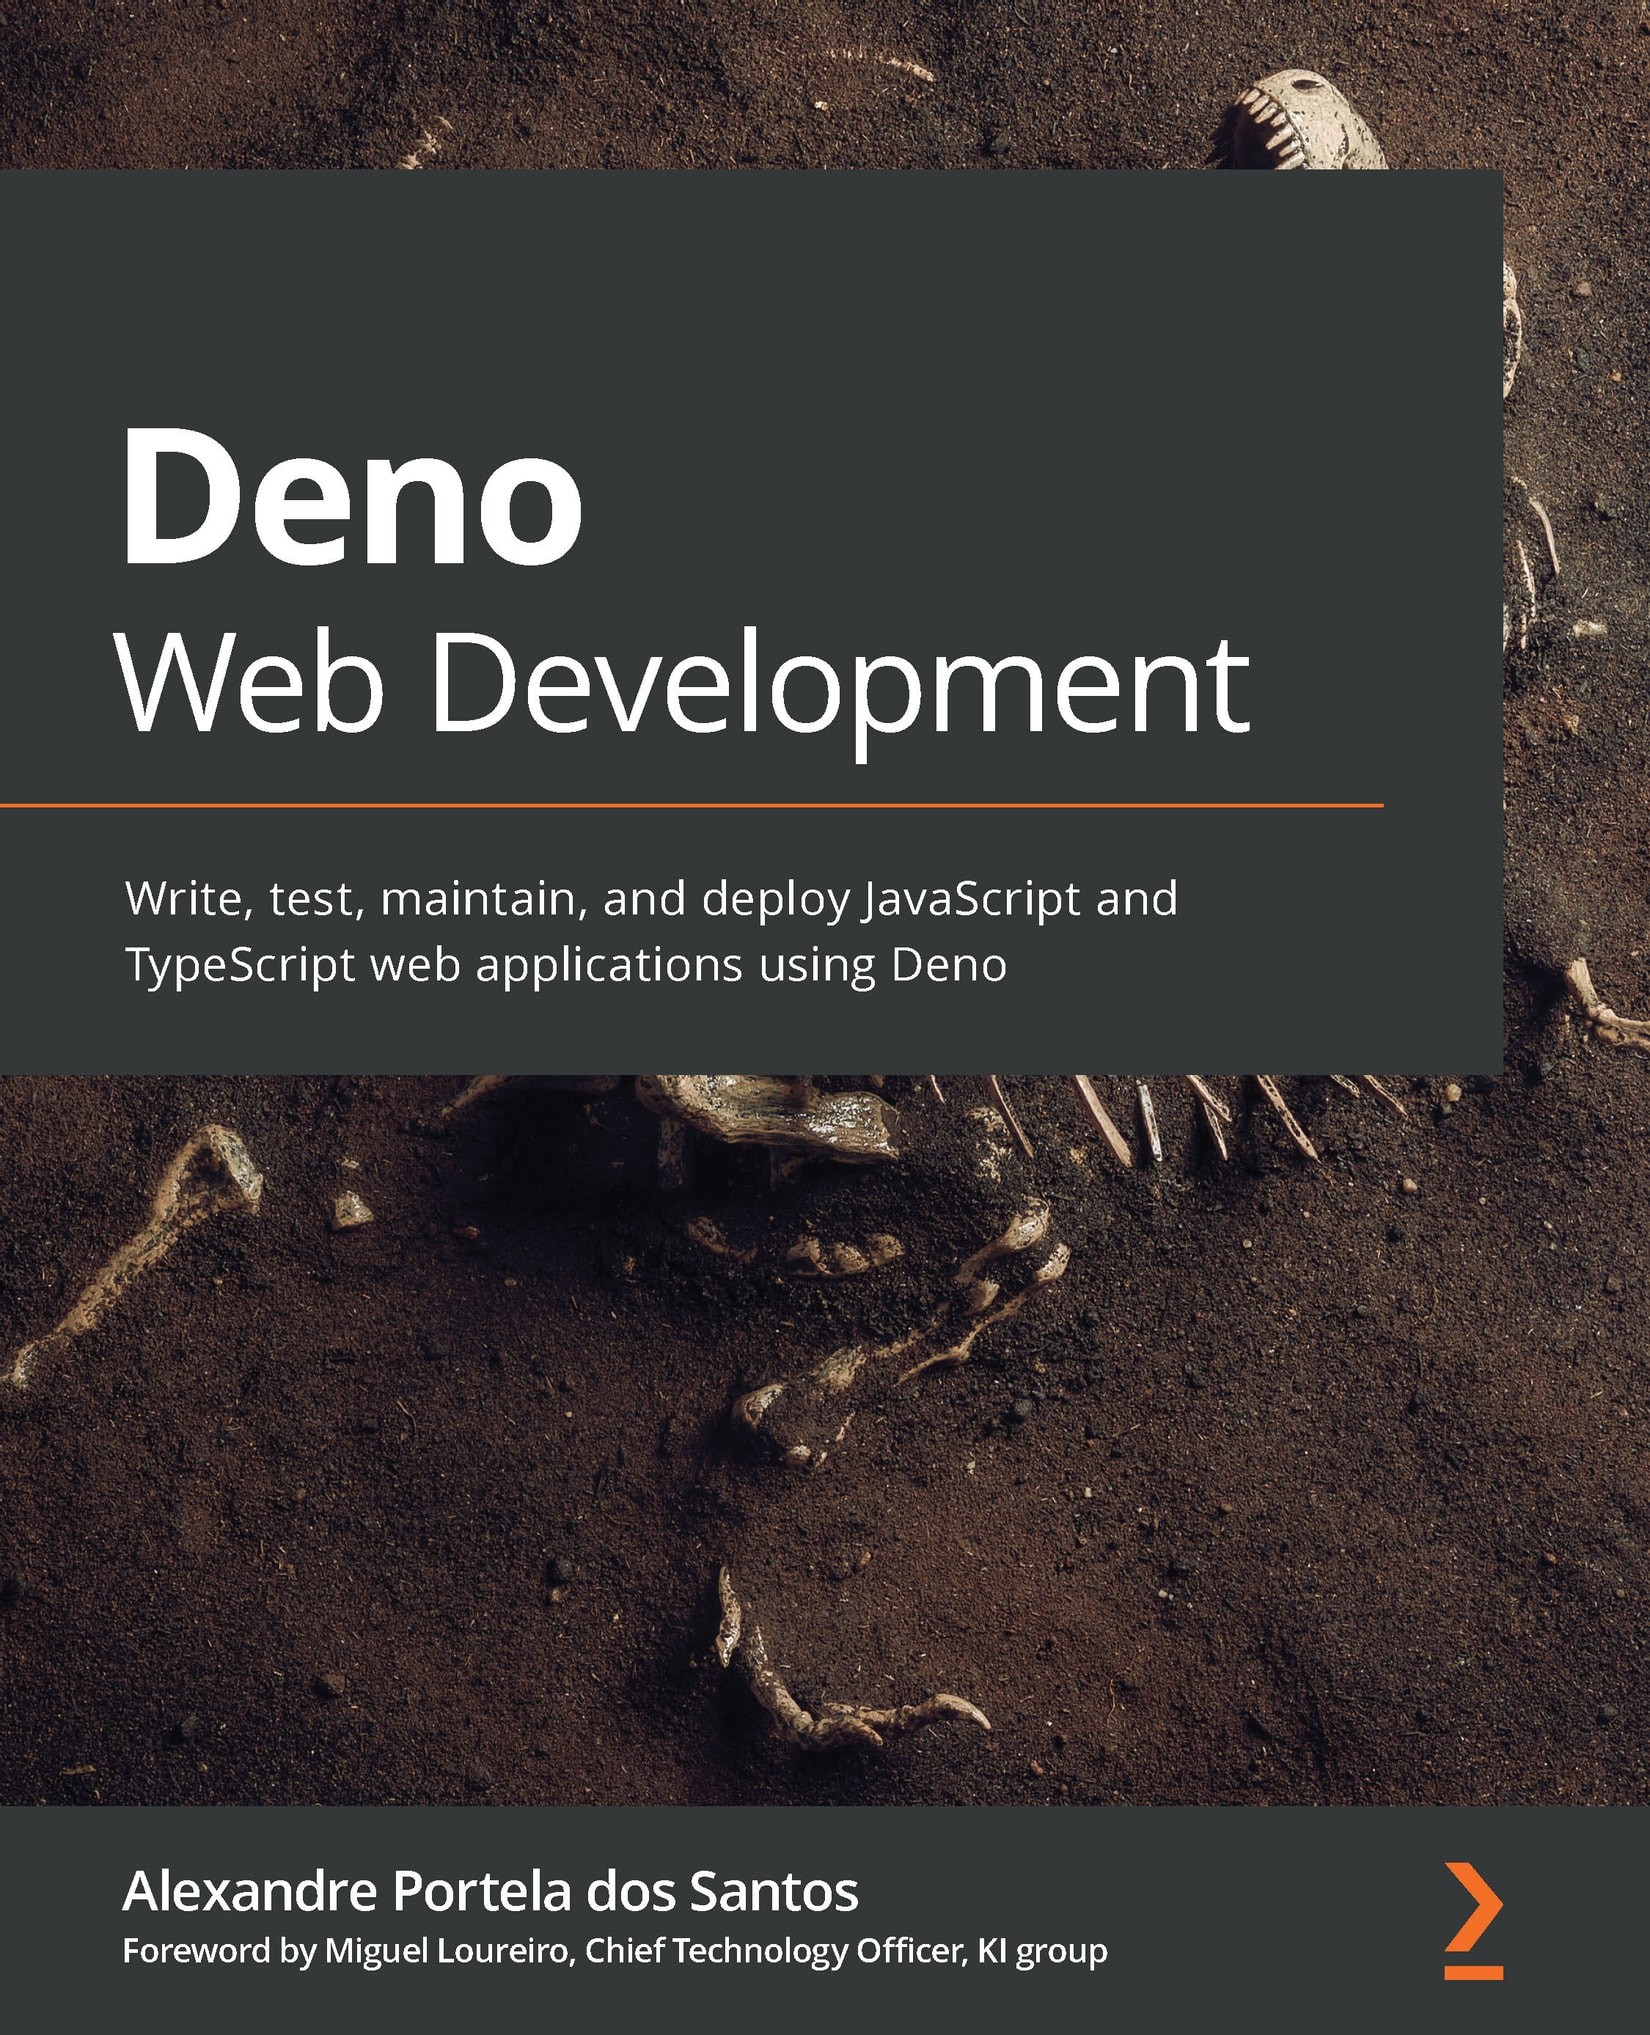 Getting Started With Deno: Write, Test, Maintain and Deploy JavaScript and TypeScript Web Applications Using Deno